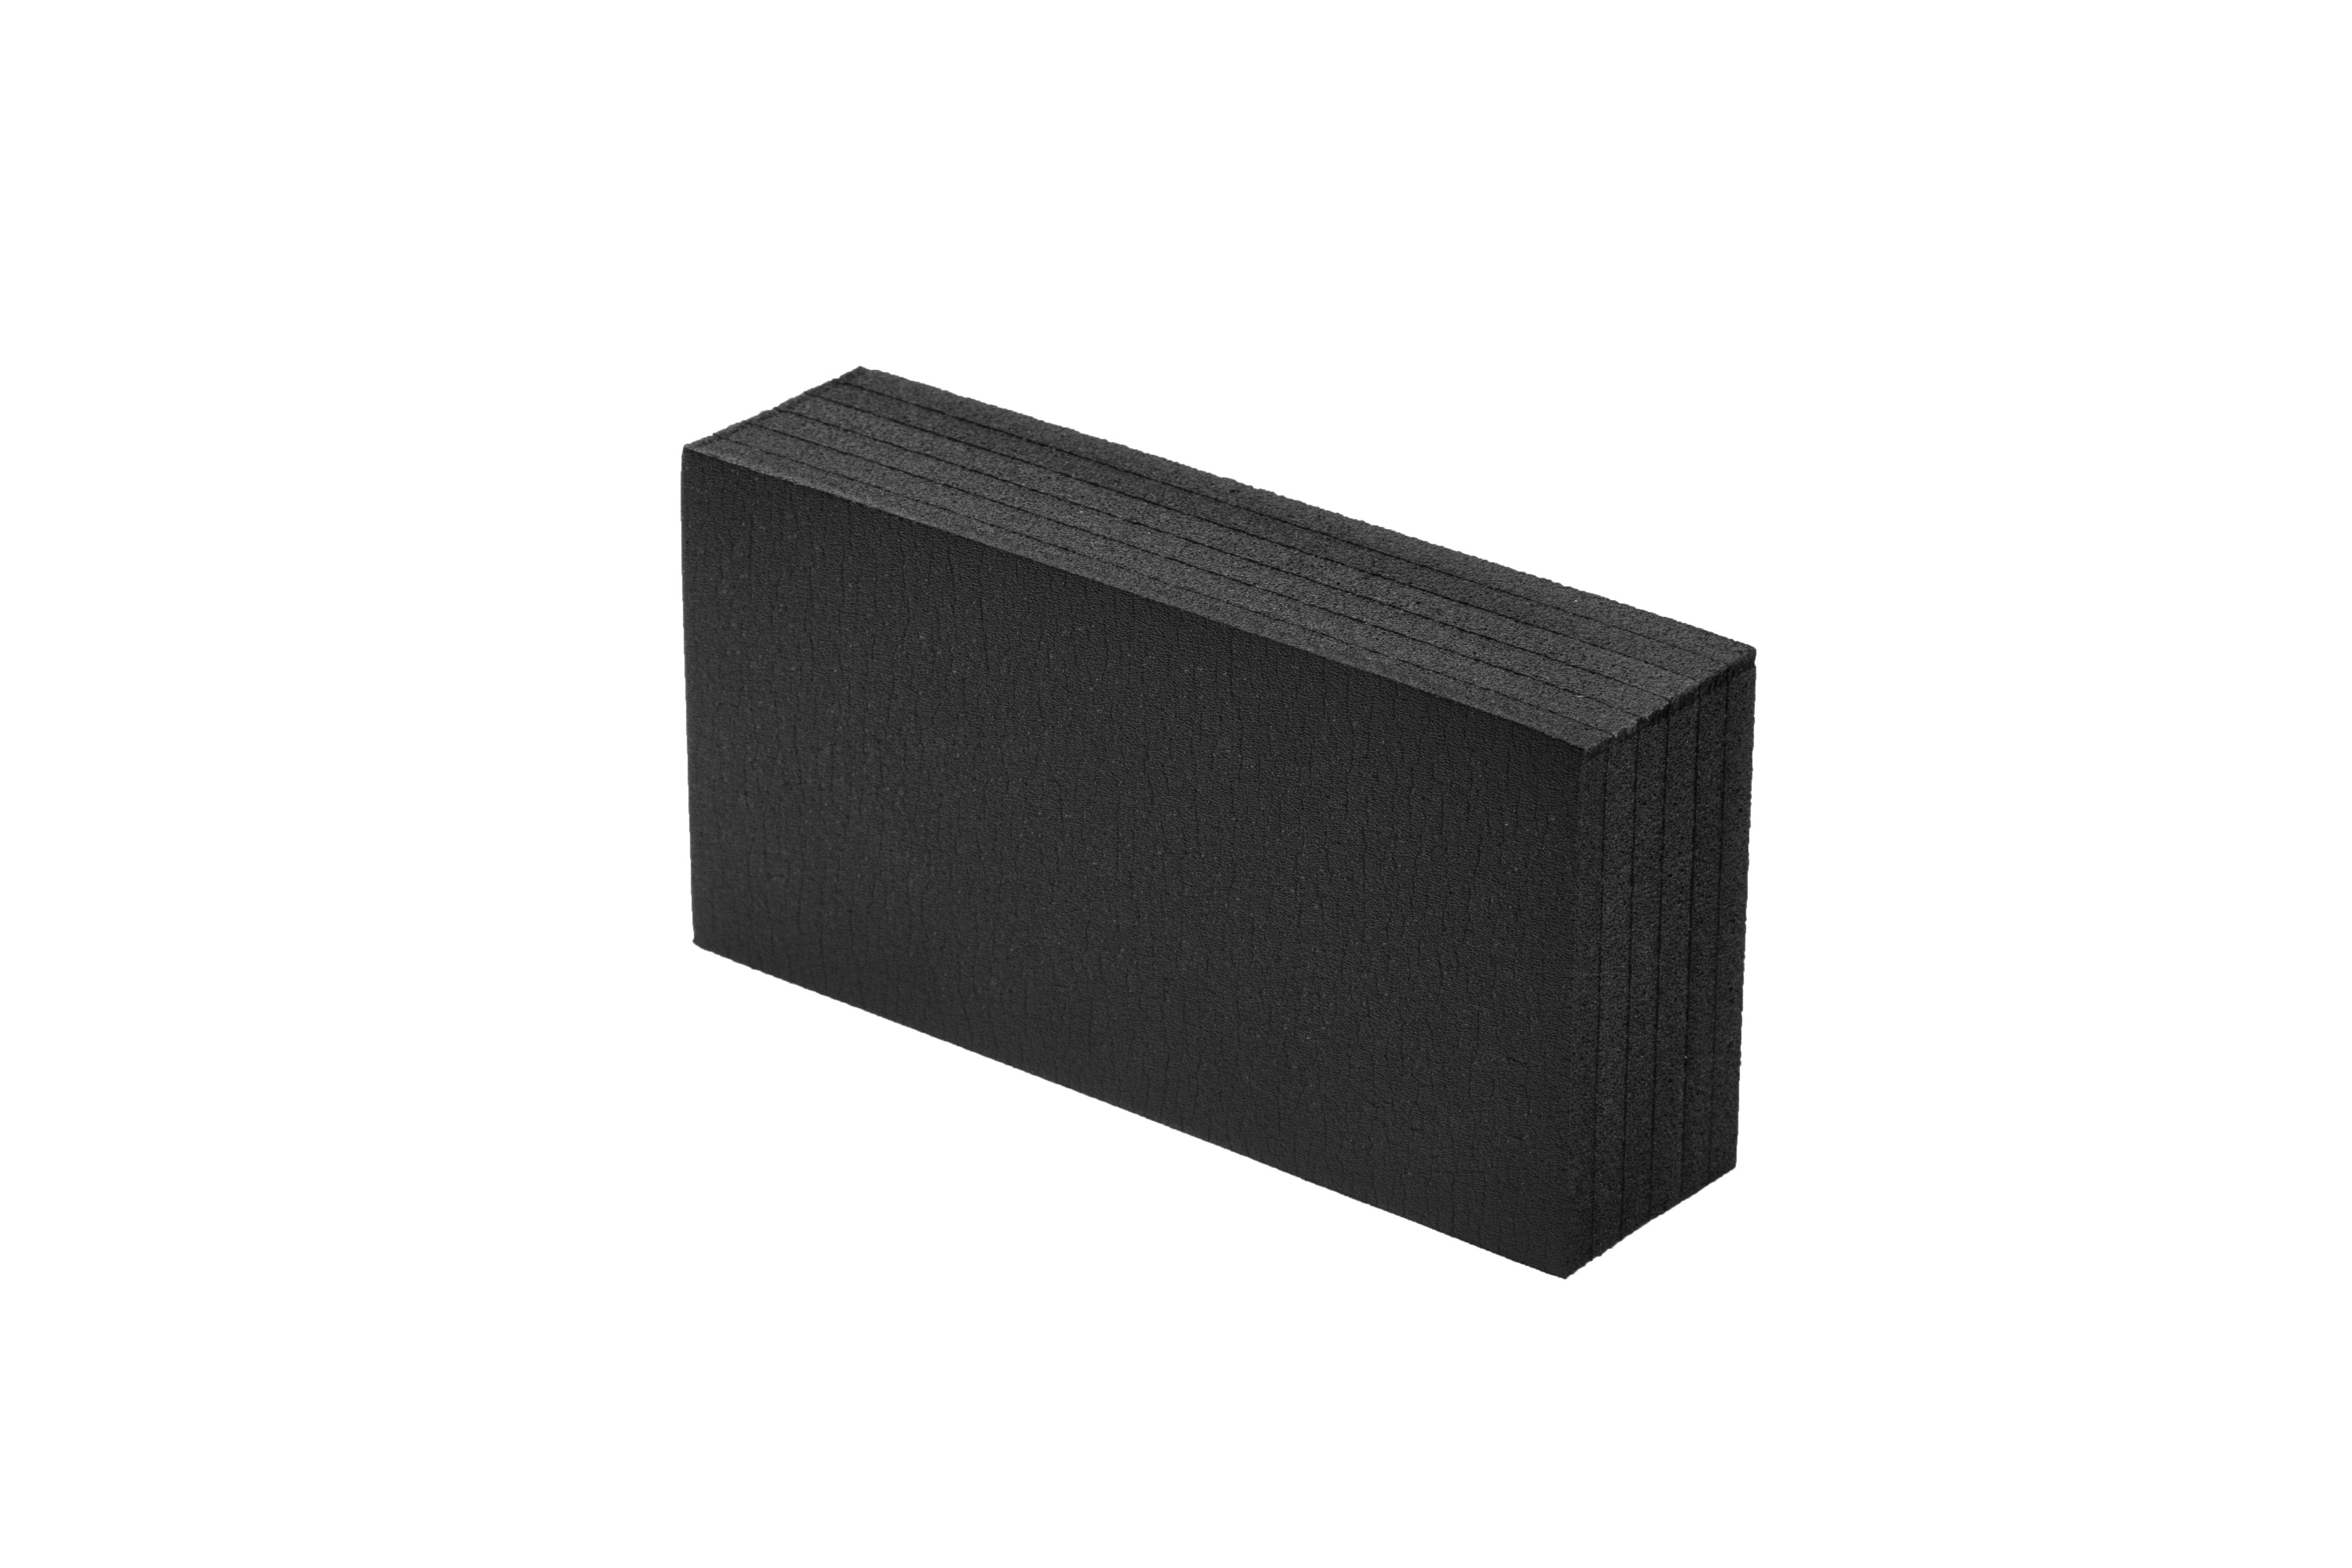 Heavy Duty Foam Dunnage Reusable Cushion for Shipping Box Crate 4x8x2